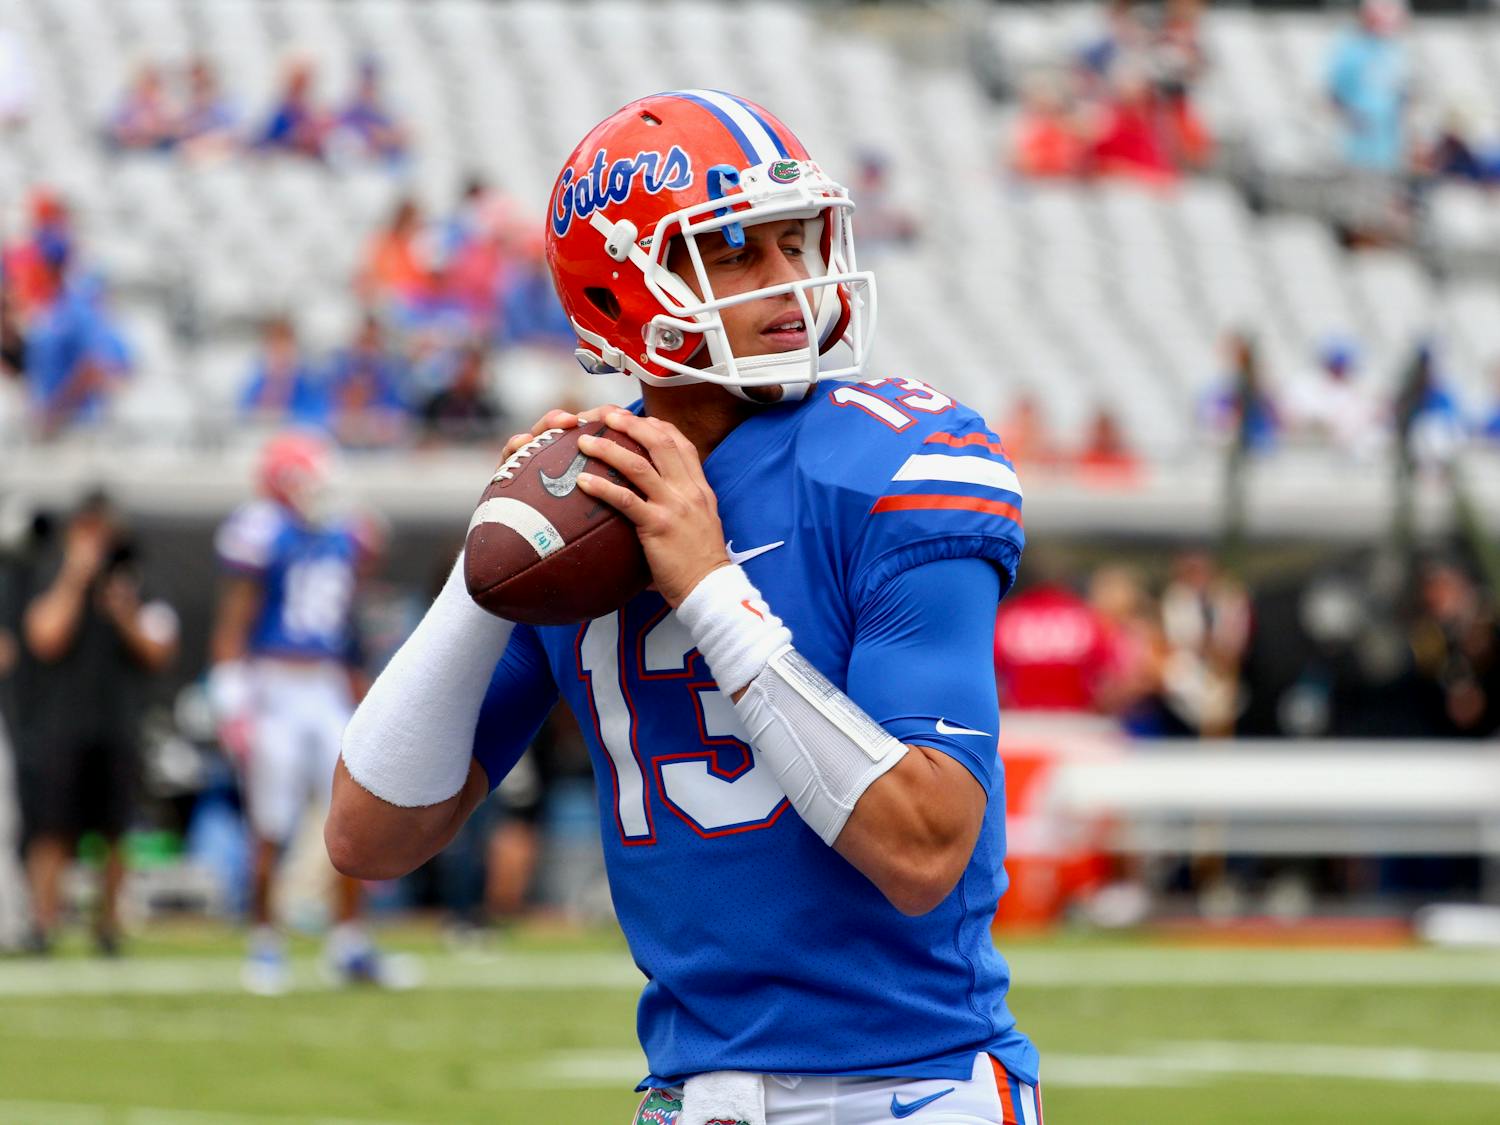 Florida quarterback Feleipe Franks is looking to move on from a disappointing 2017 campaign.